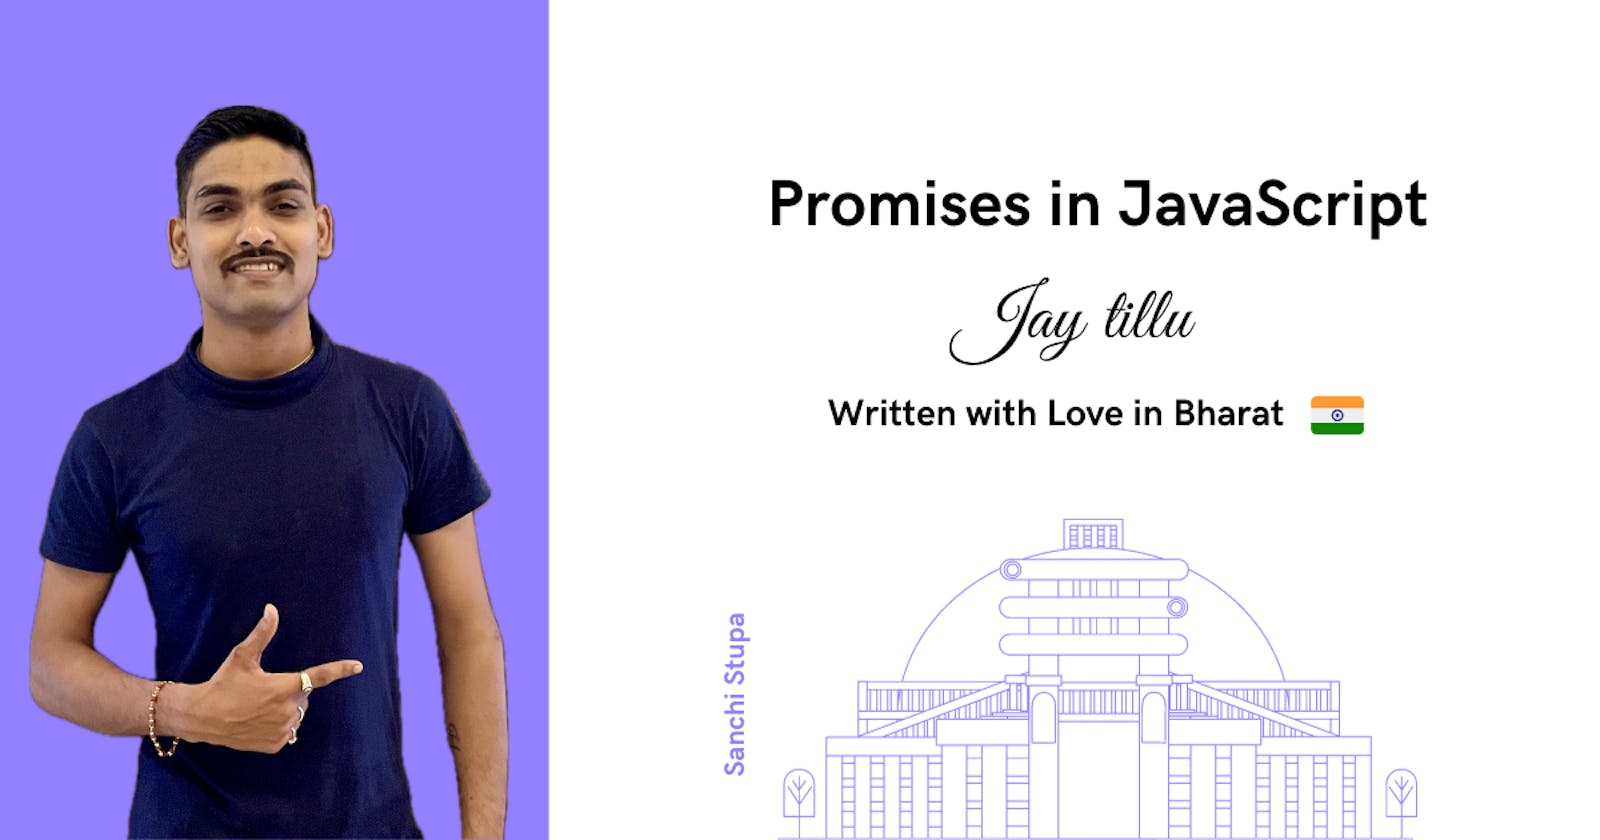 What is Promises in JavaScript